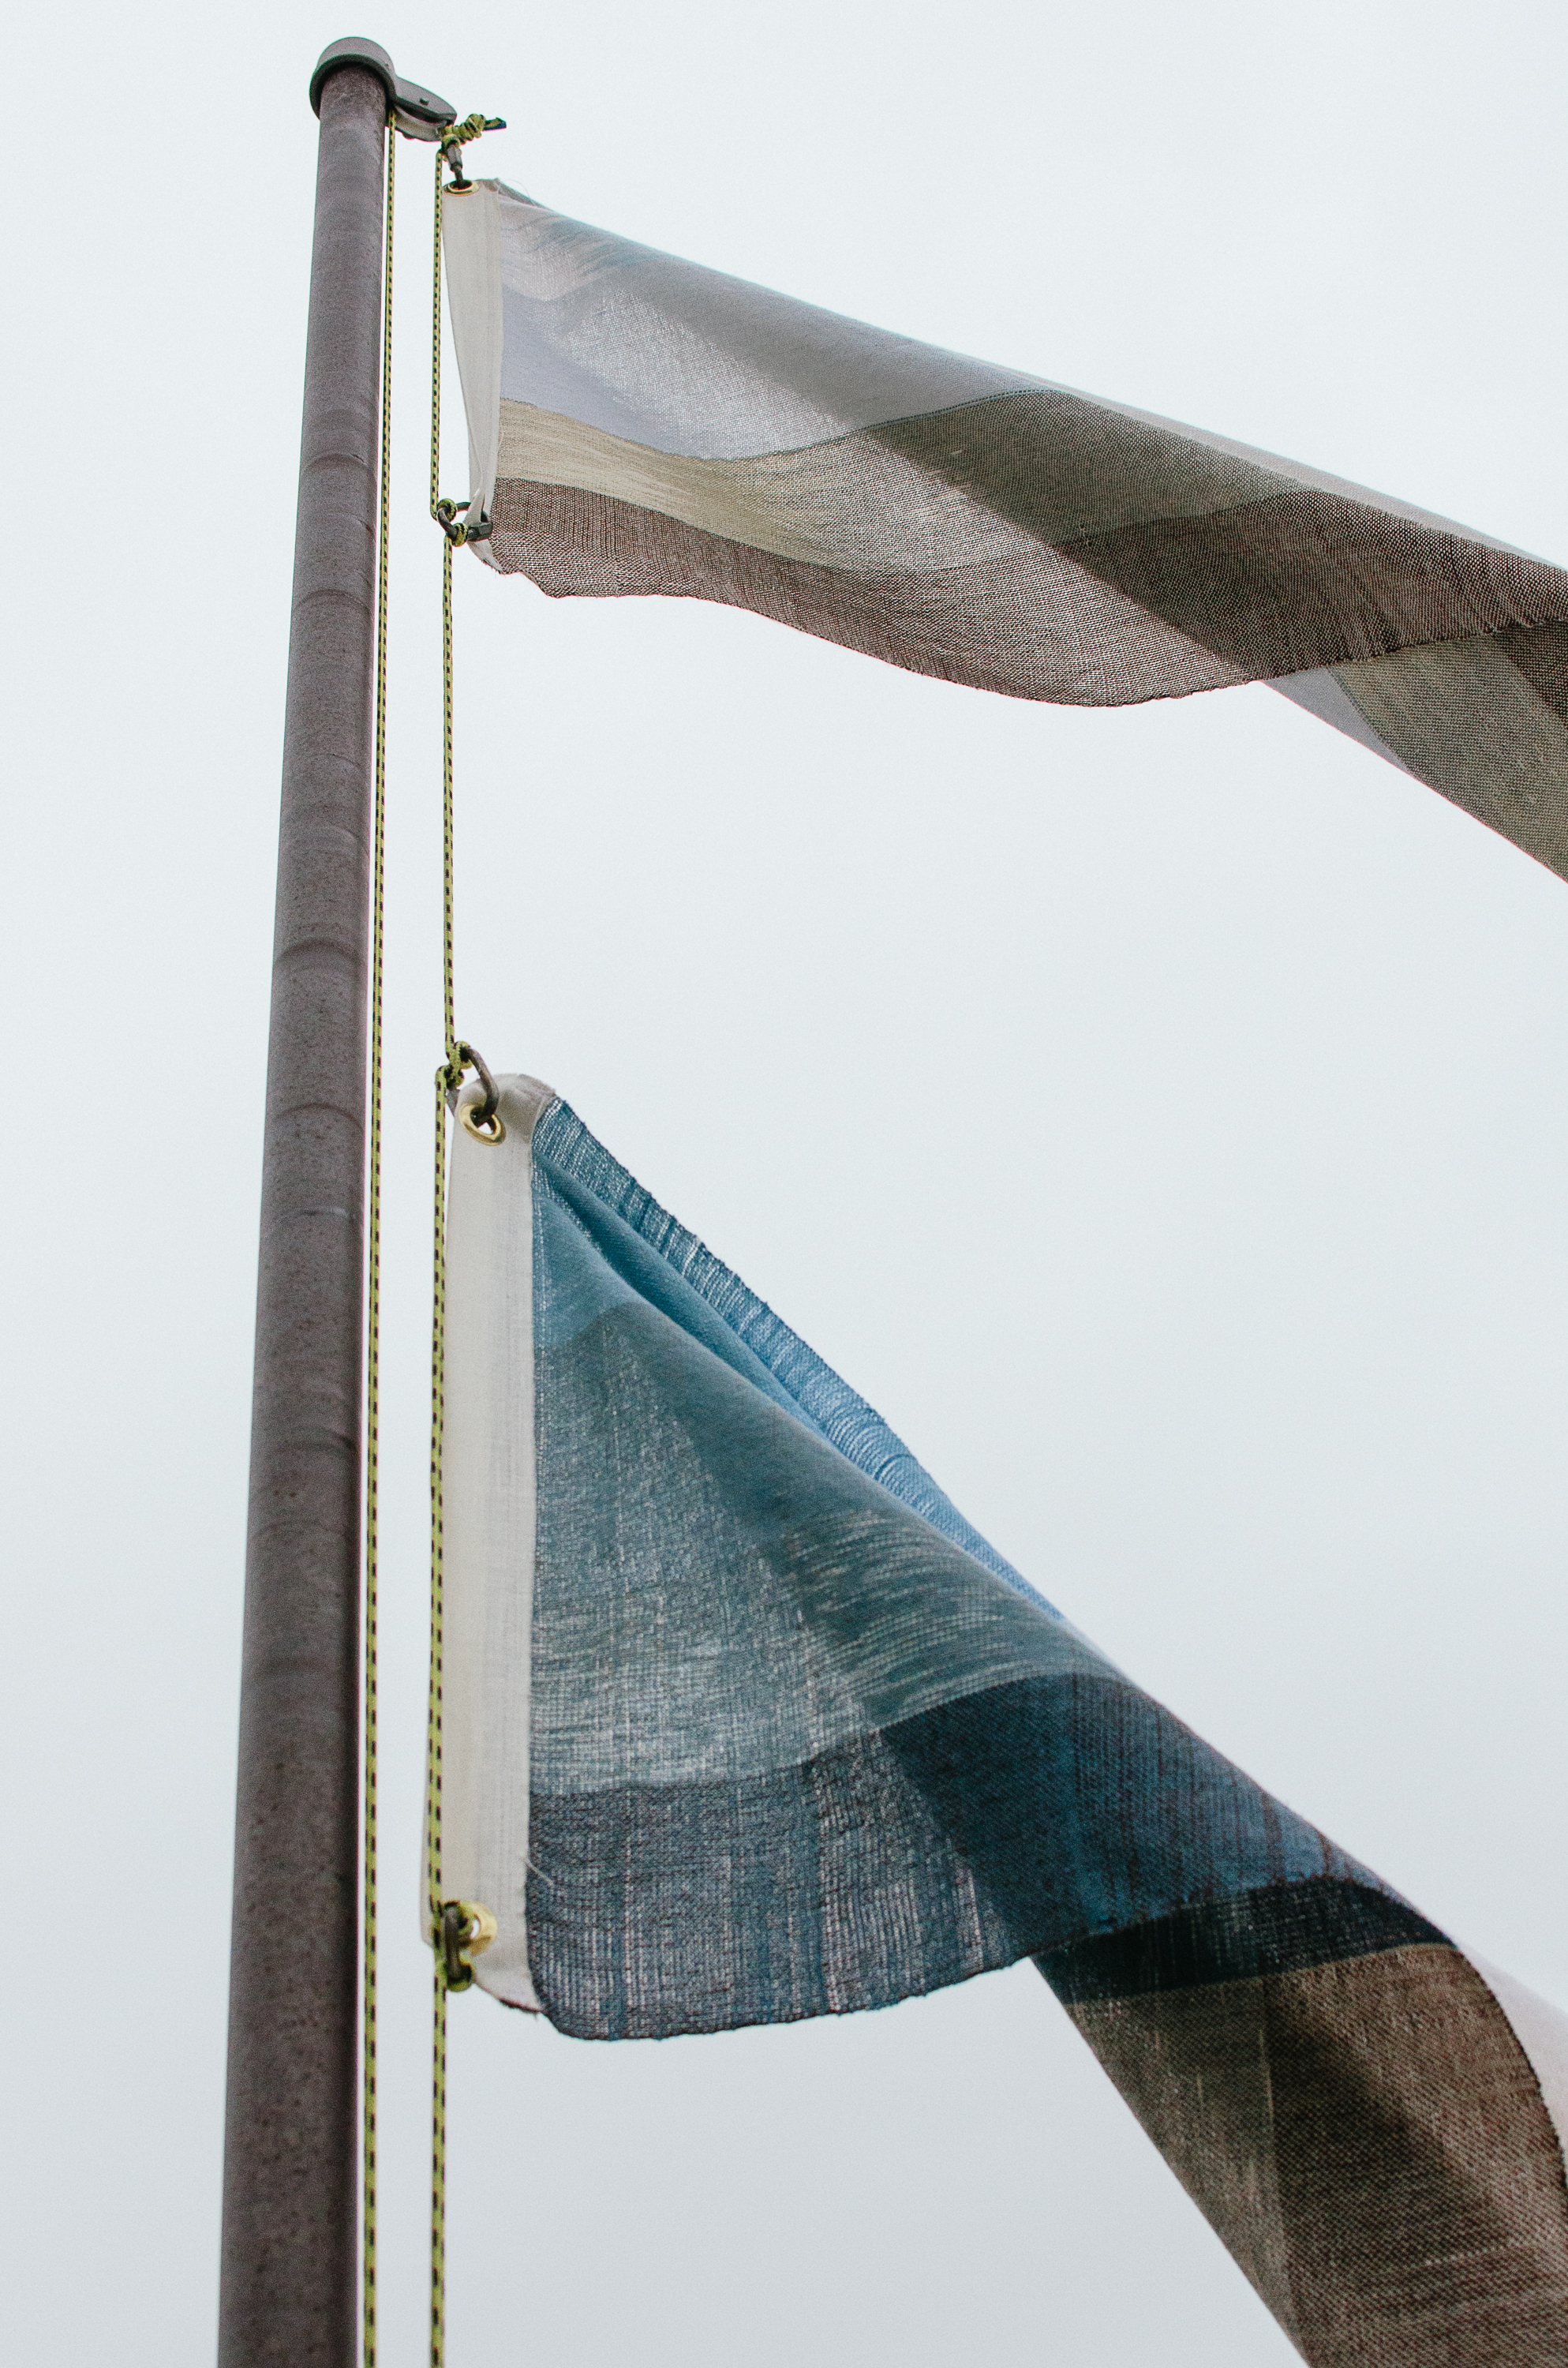   Banner-scape No. 5-8: Acadia, Cadillac, Oberg &amp; Aran.&nbsp; Hand-woven, hand-dyed cloth, 2013. 